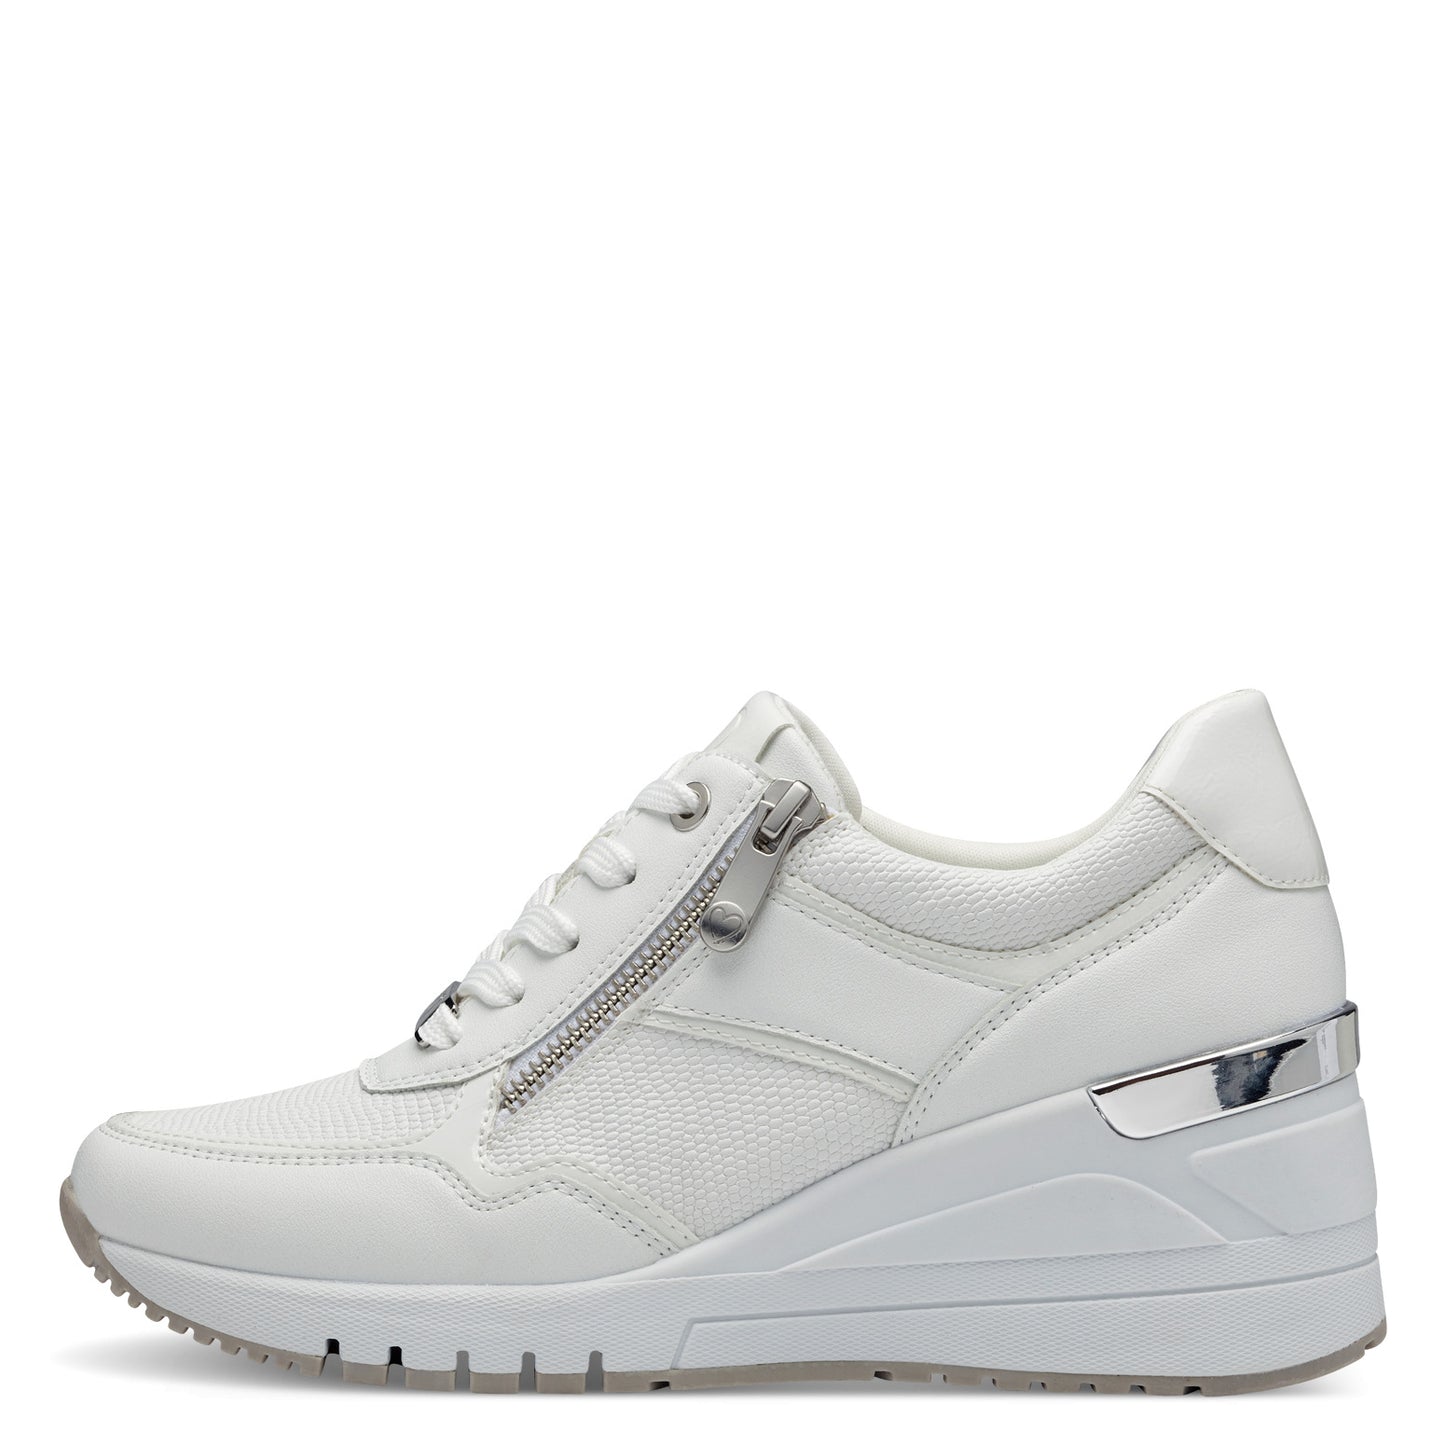 Marco Tozzi - Ladies Shoes Trainers White (1911)